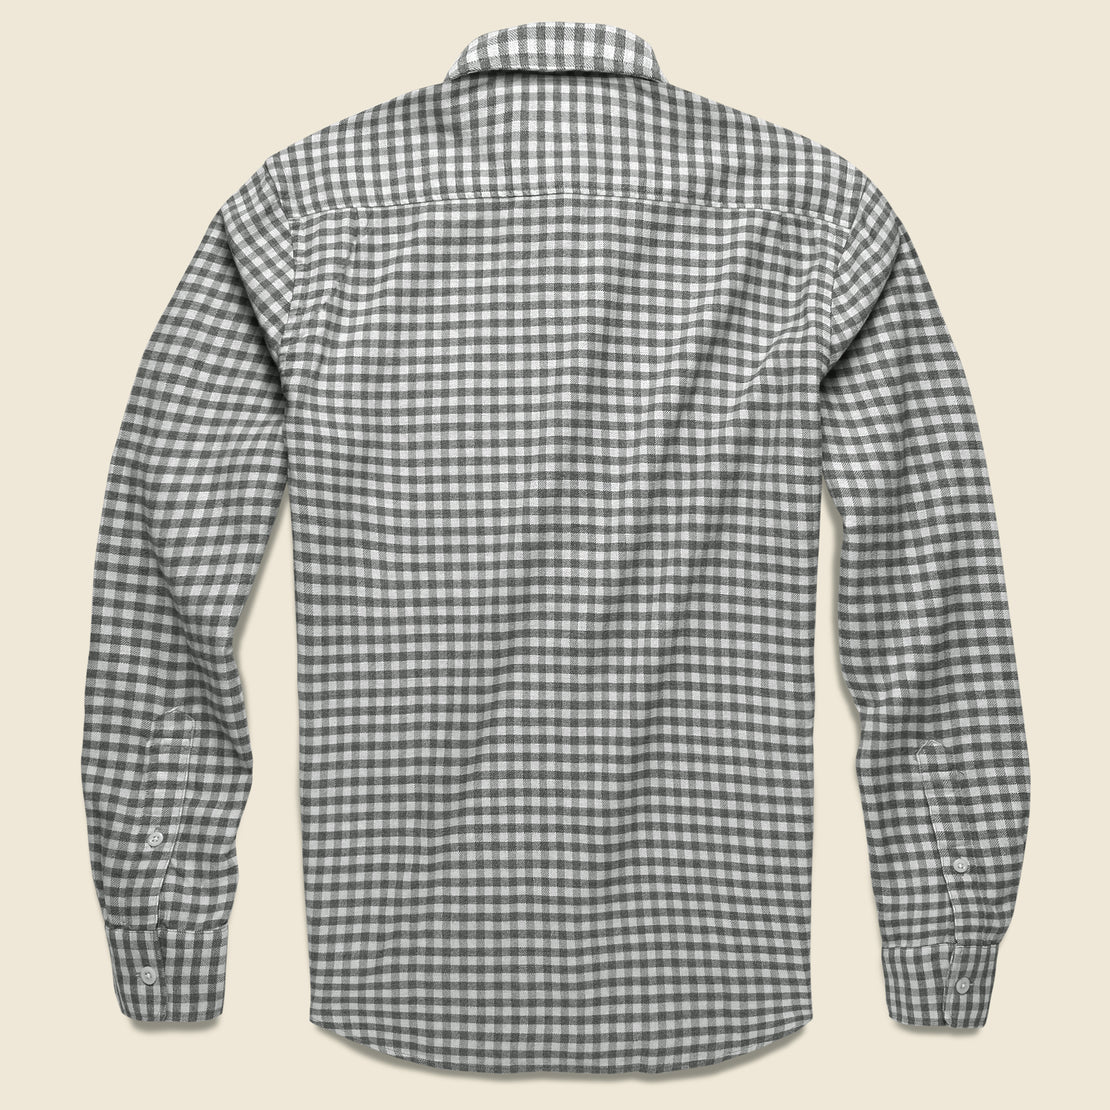 Stretch Seaview Flannel - Cream Charcoal Gingham - Faherty - STAG Provisions - Tops - L/S Woven - Plaid